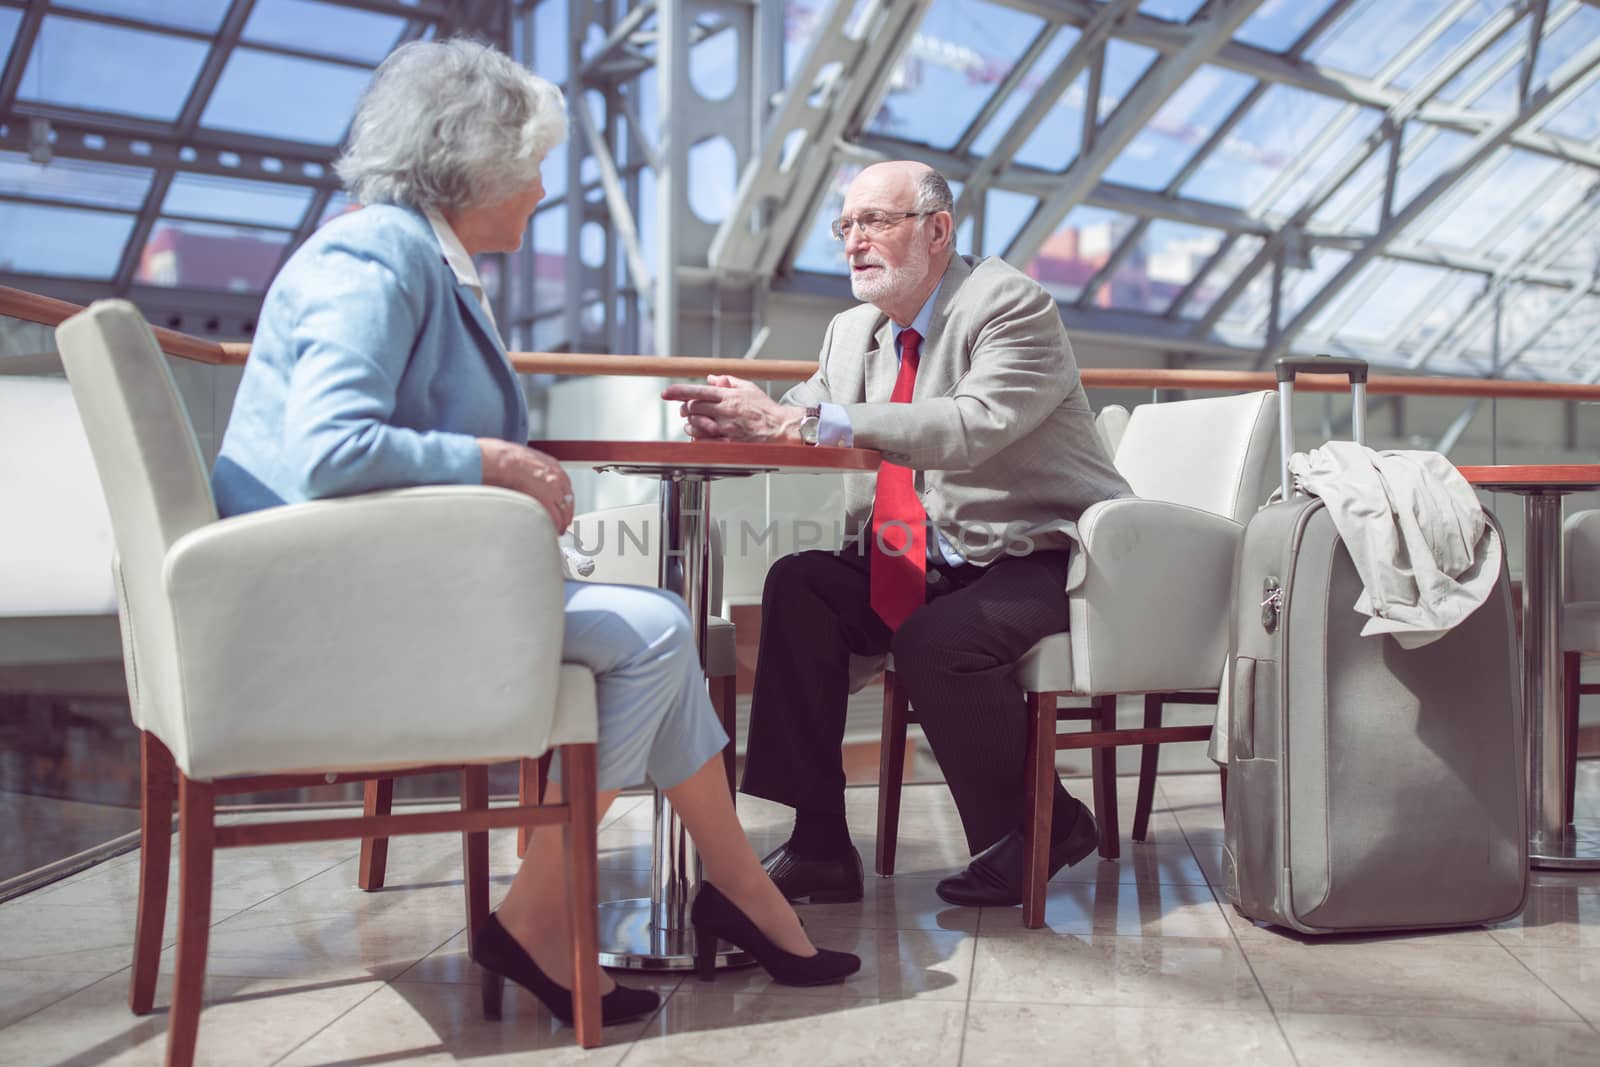 Happy elderly senior couple of travelers with suitcase in airport cafe waiting for flight